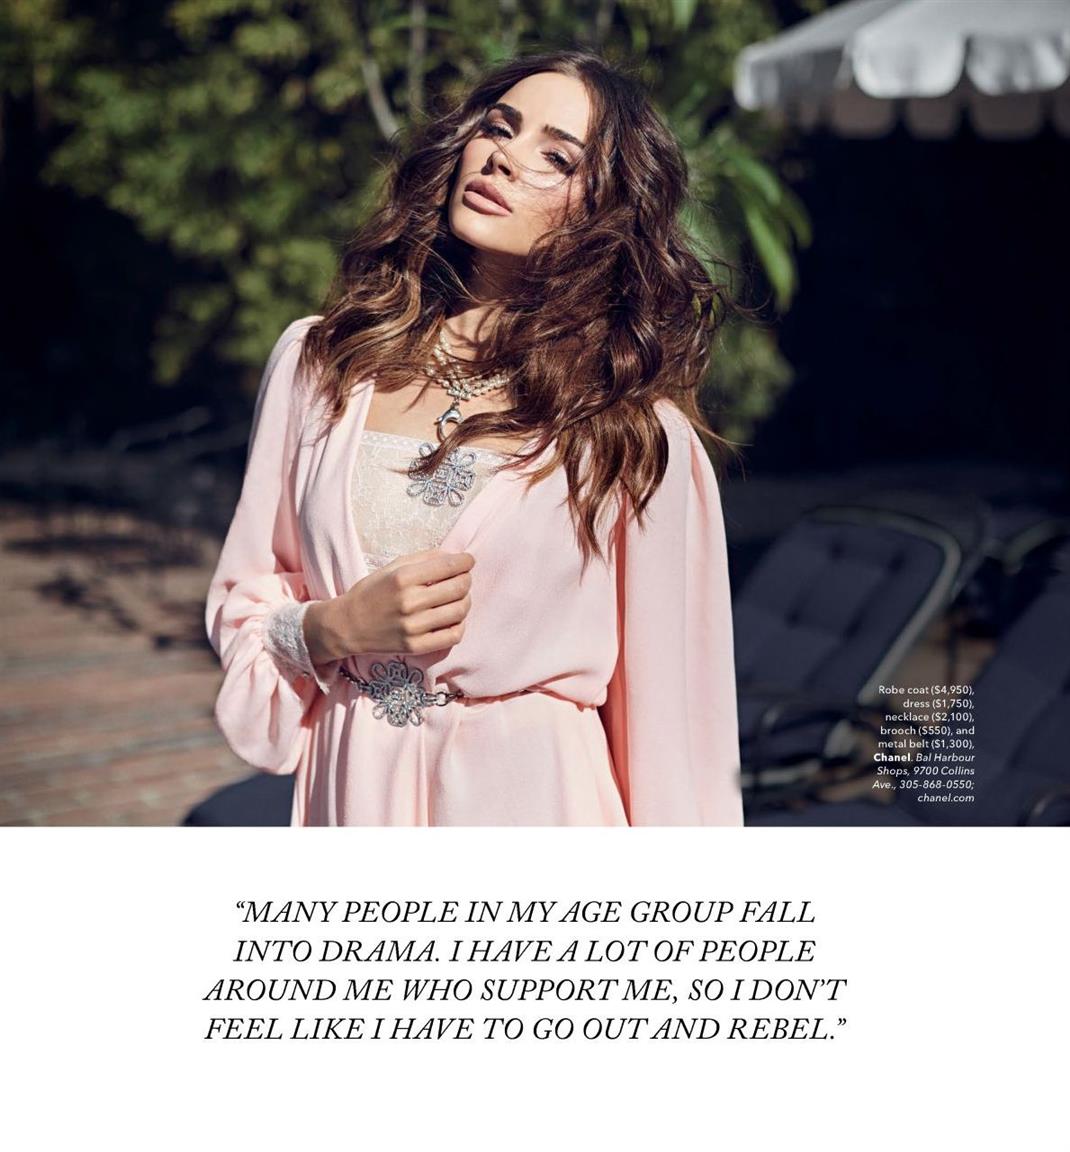 Olivia Culpo dons the Ocean Drive Magazine Cover like a Queen